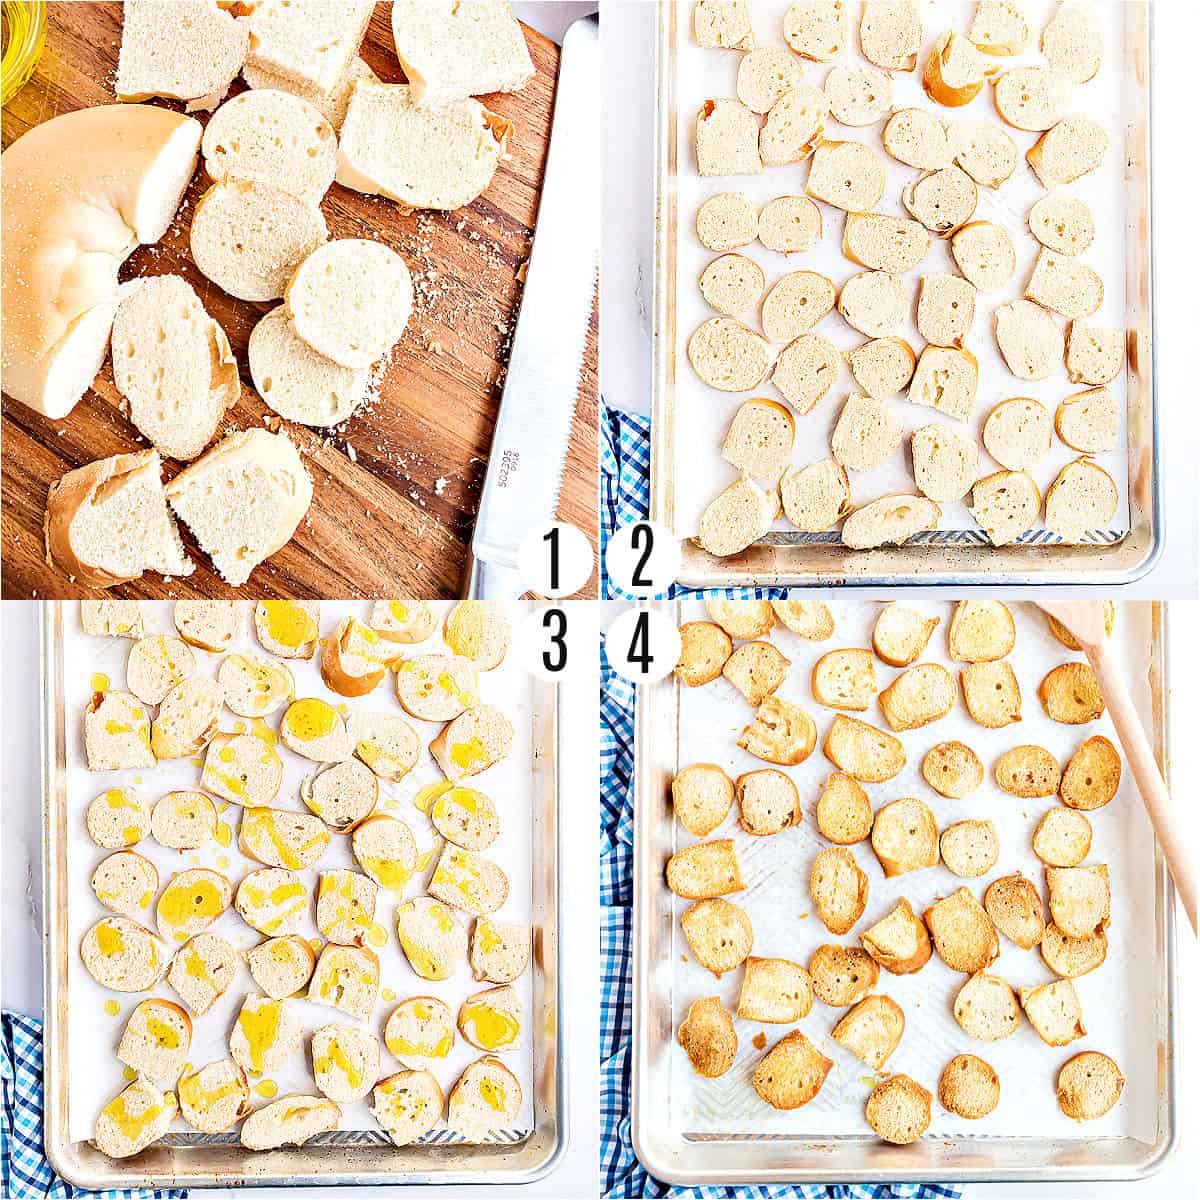 Step by step photos showing how to make homemade bagel chips.